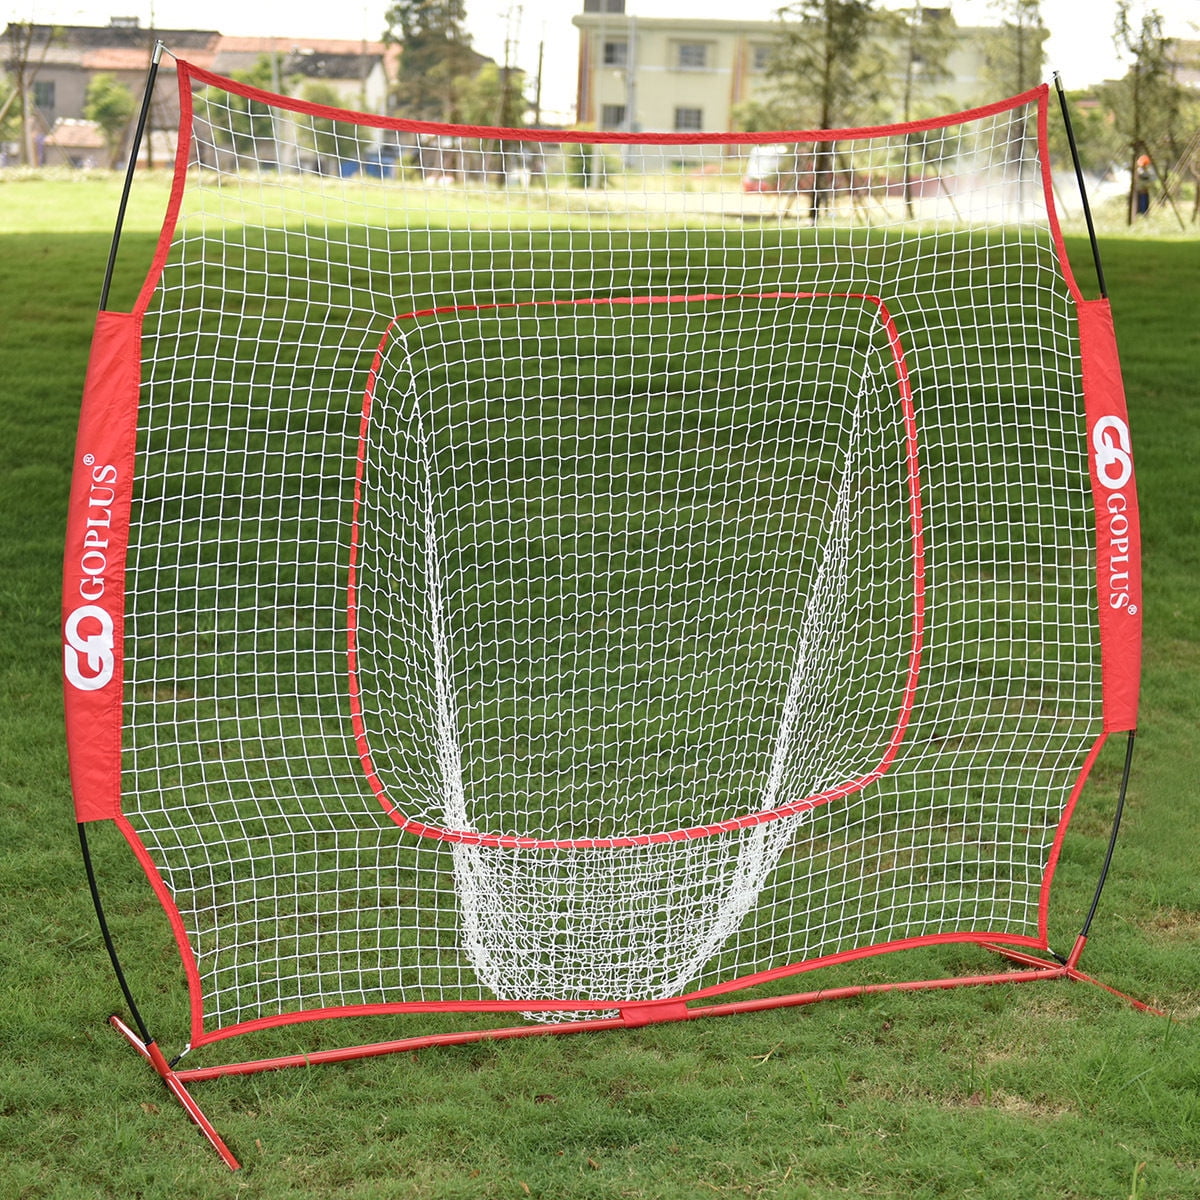 Carry Bag Great for All Skill Levels Training 7 x 7 Baseball Practice Net Hitting & Pitching Net with Bow Frame ZENSTYLE 5 x 5